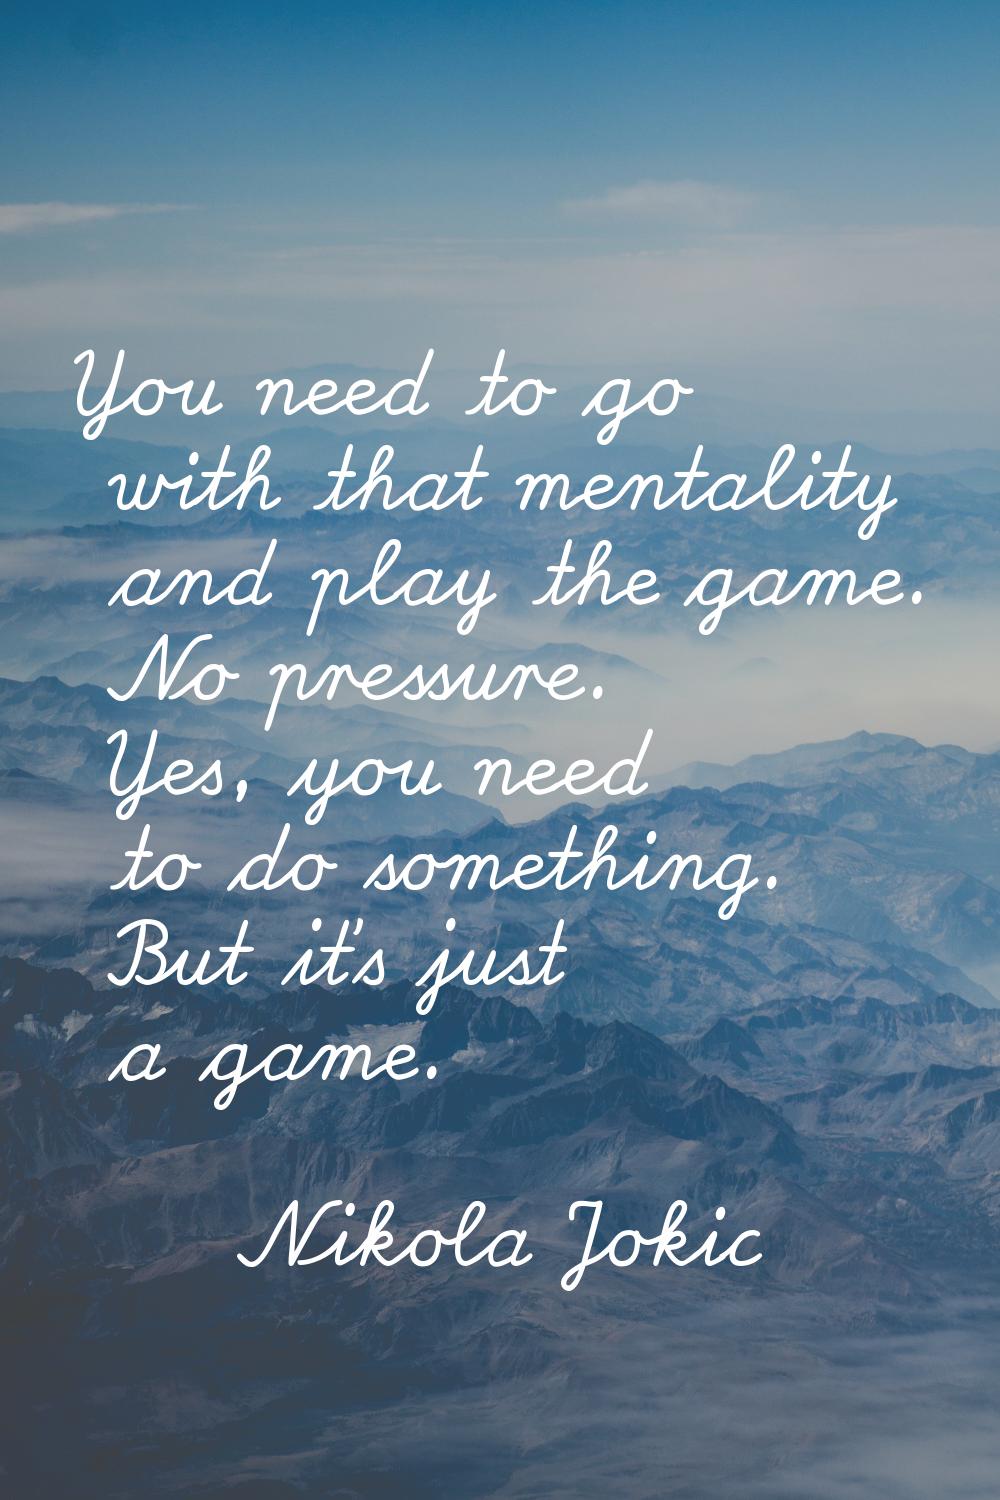 You need to go with that mentality and play the game. No pressure. Yes, you need to do something. B